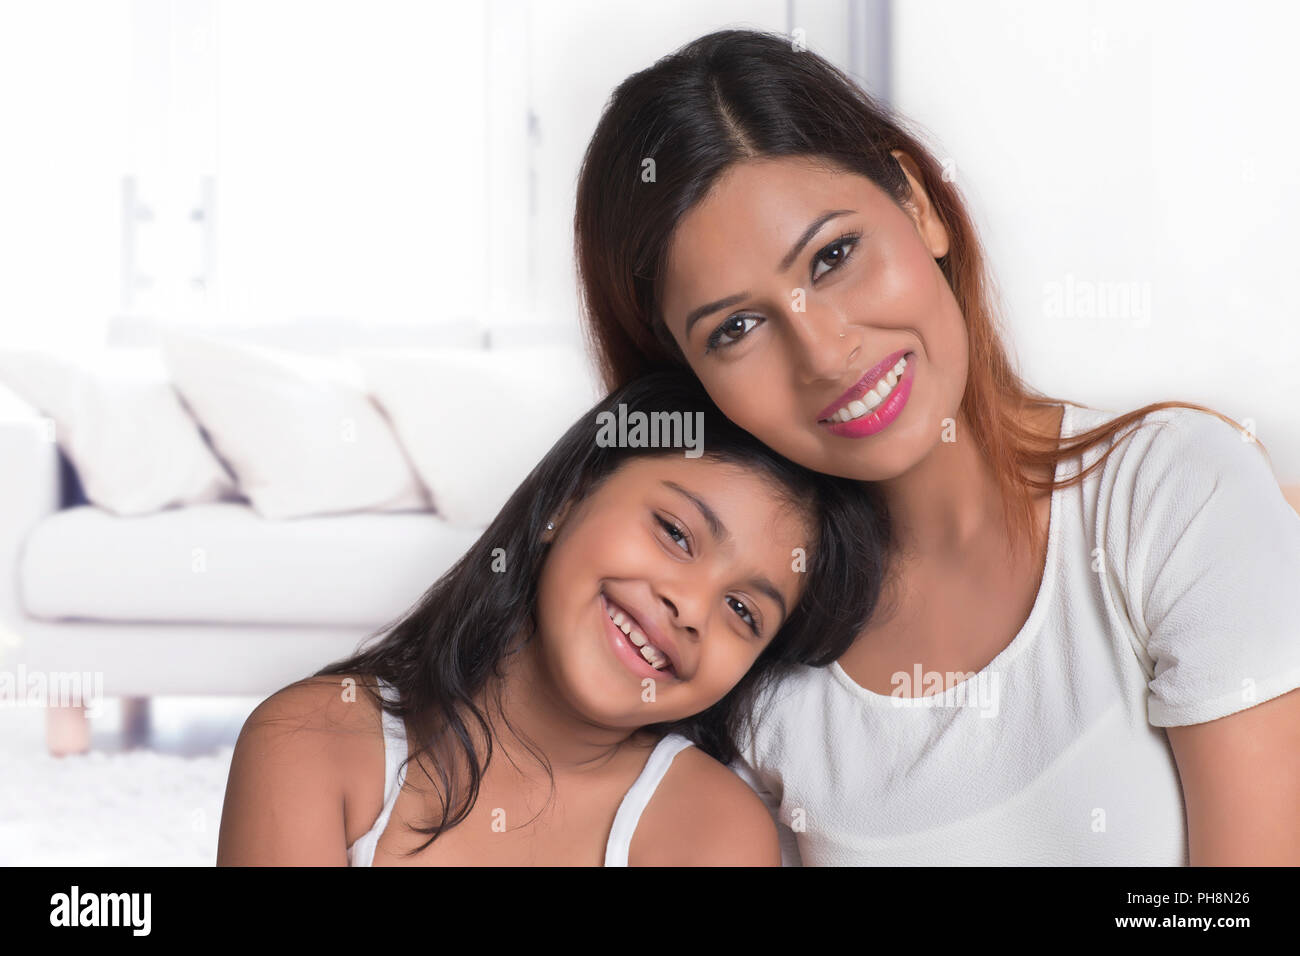 Portrait of smiling mother and daughter Banque D'Images